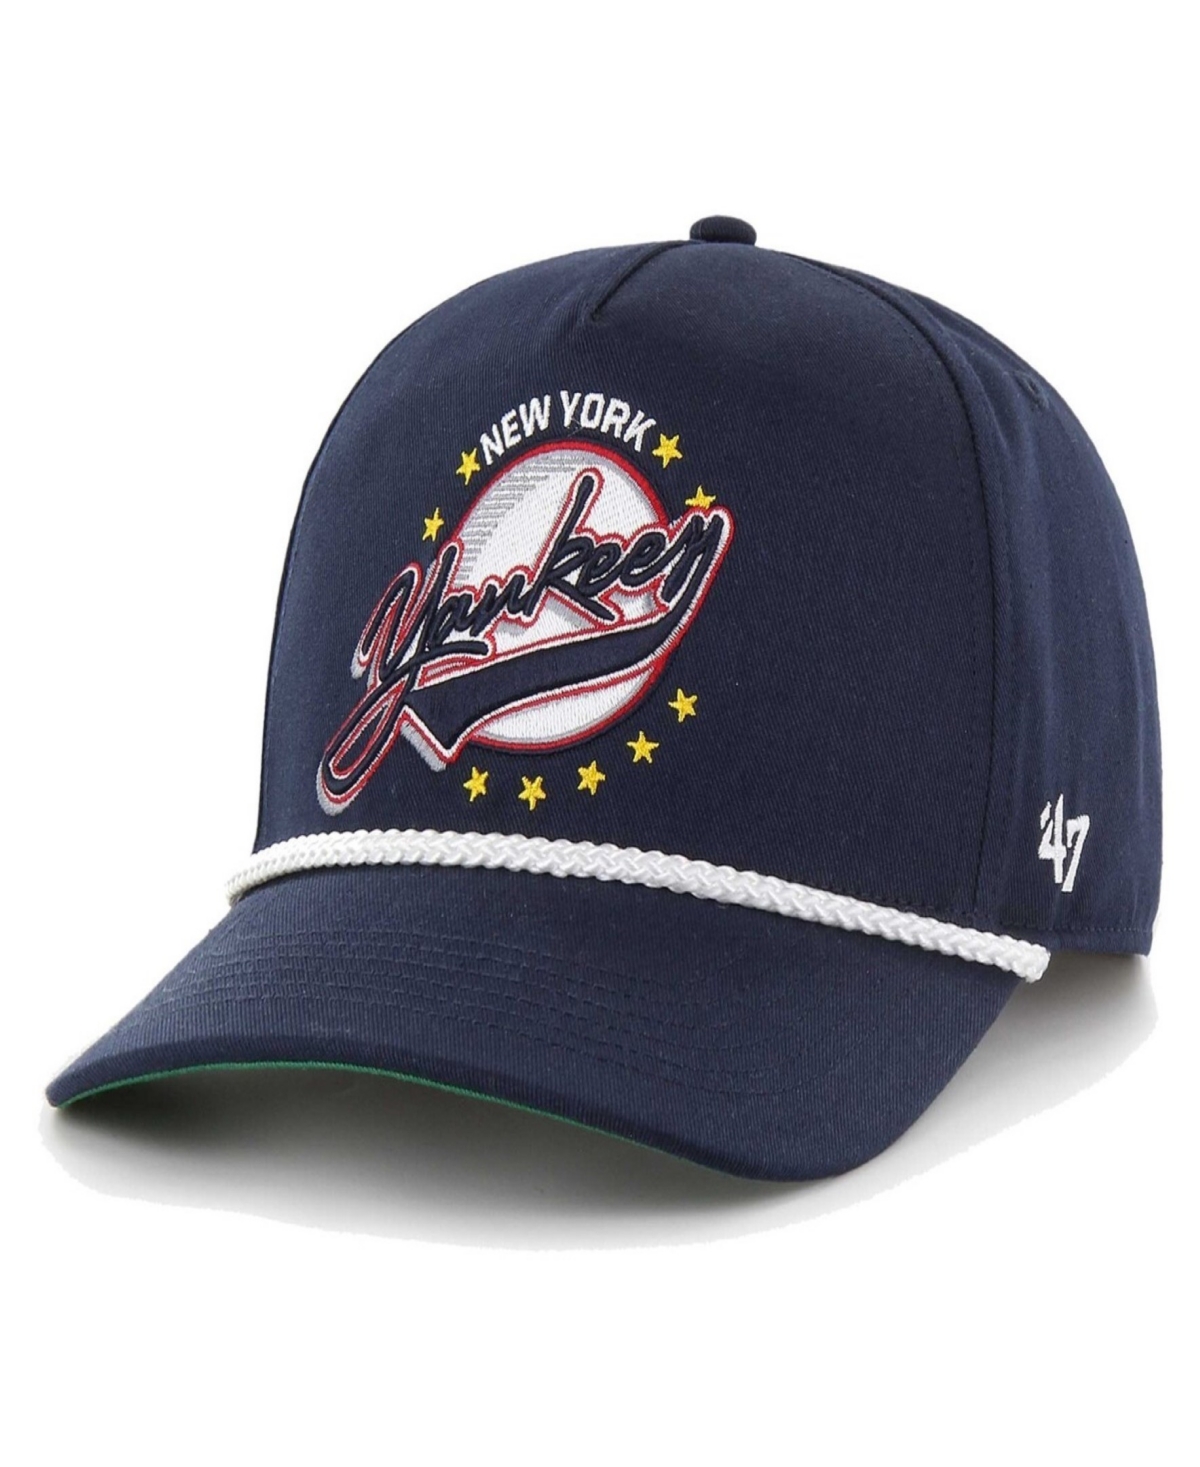 47 Brand Men's Navy New York Yankees Wax Pack Collection Premier Hitch Adjustable Hat - Navy